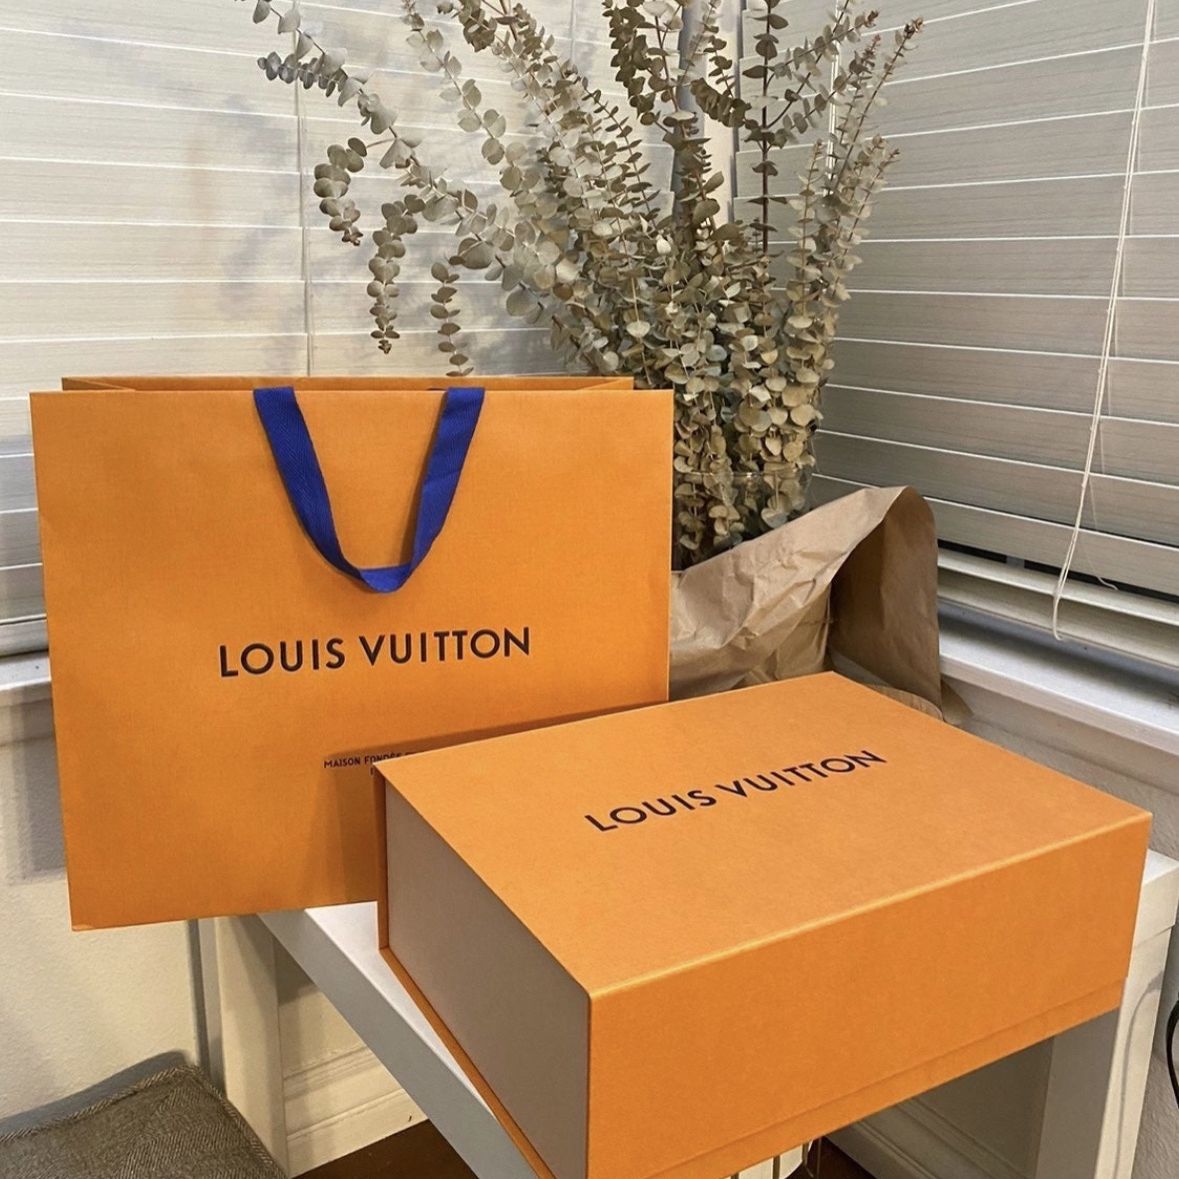 Louis Vuitton Box and Shopping bag for Sale in Monterey Park, CA